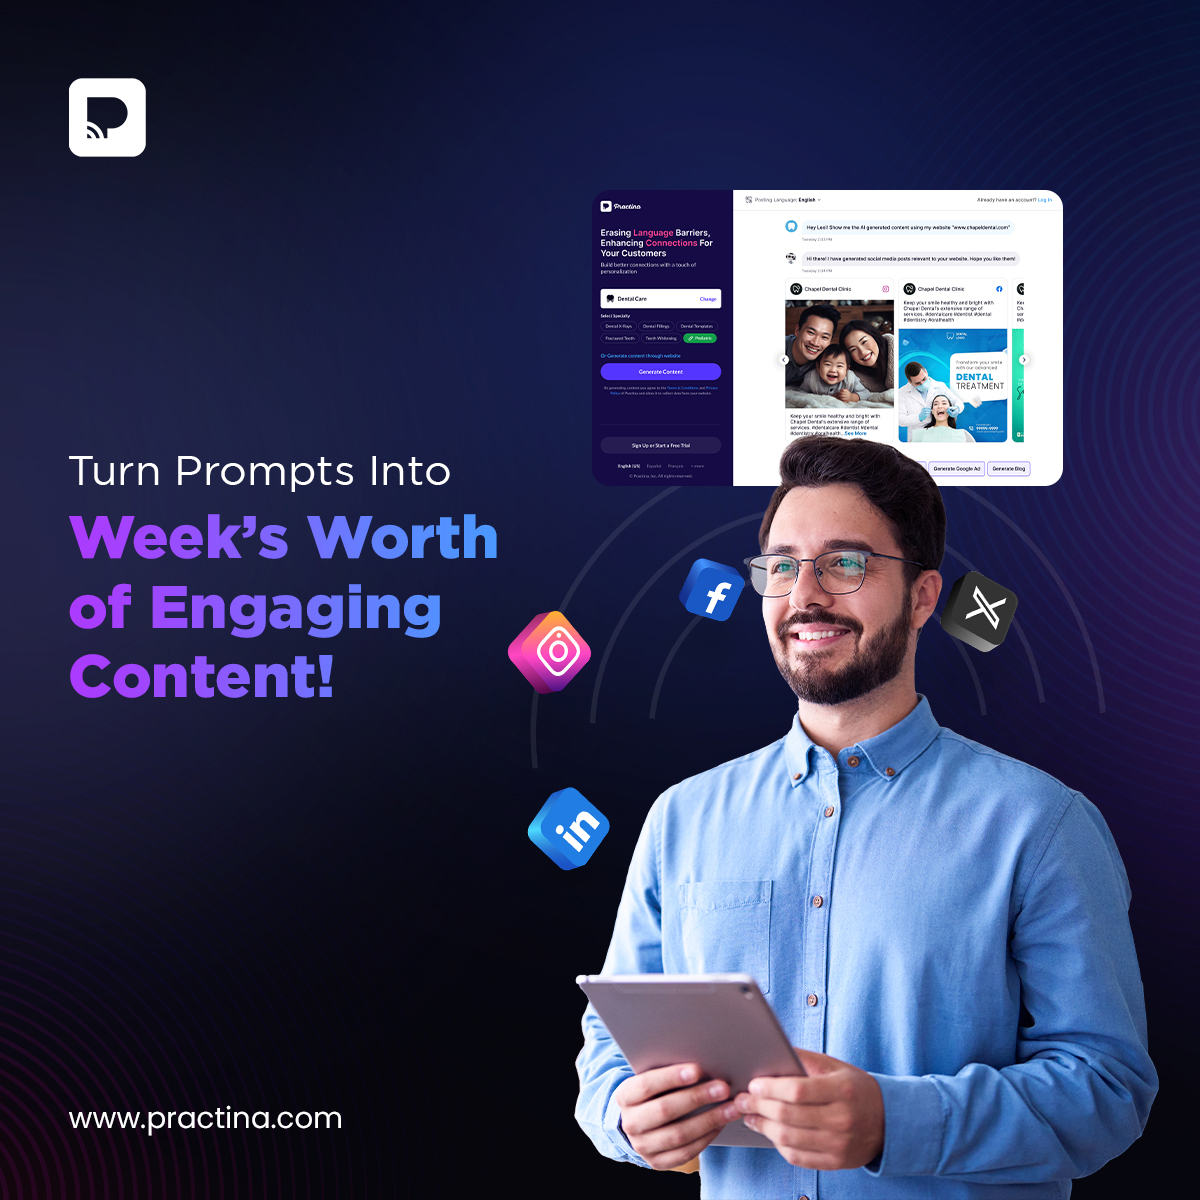 With Practina, all it takes is a few prompts to generate a week's worth of content. Yes, and Practina even gives you prompt suggestions based on your industry. So, if you're tired of telling Lexi what to do - we have a wide range of prompts that align with your industry needs!